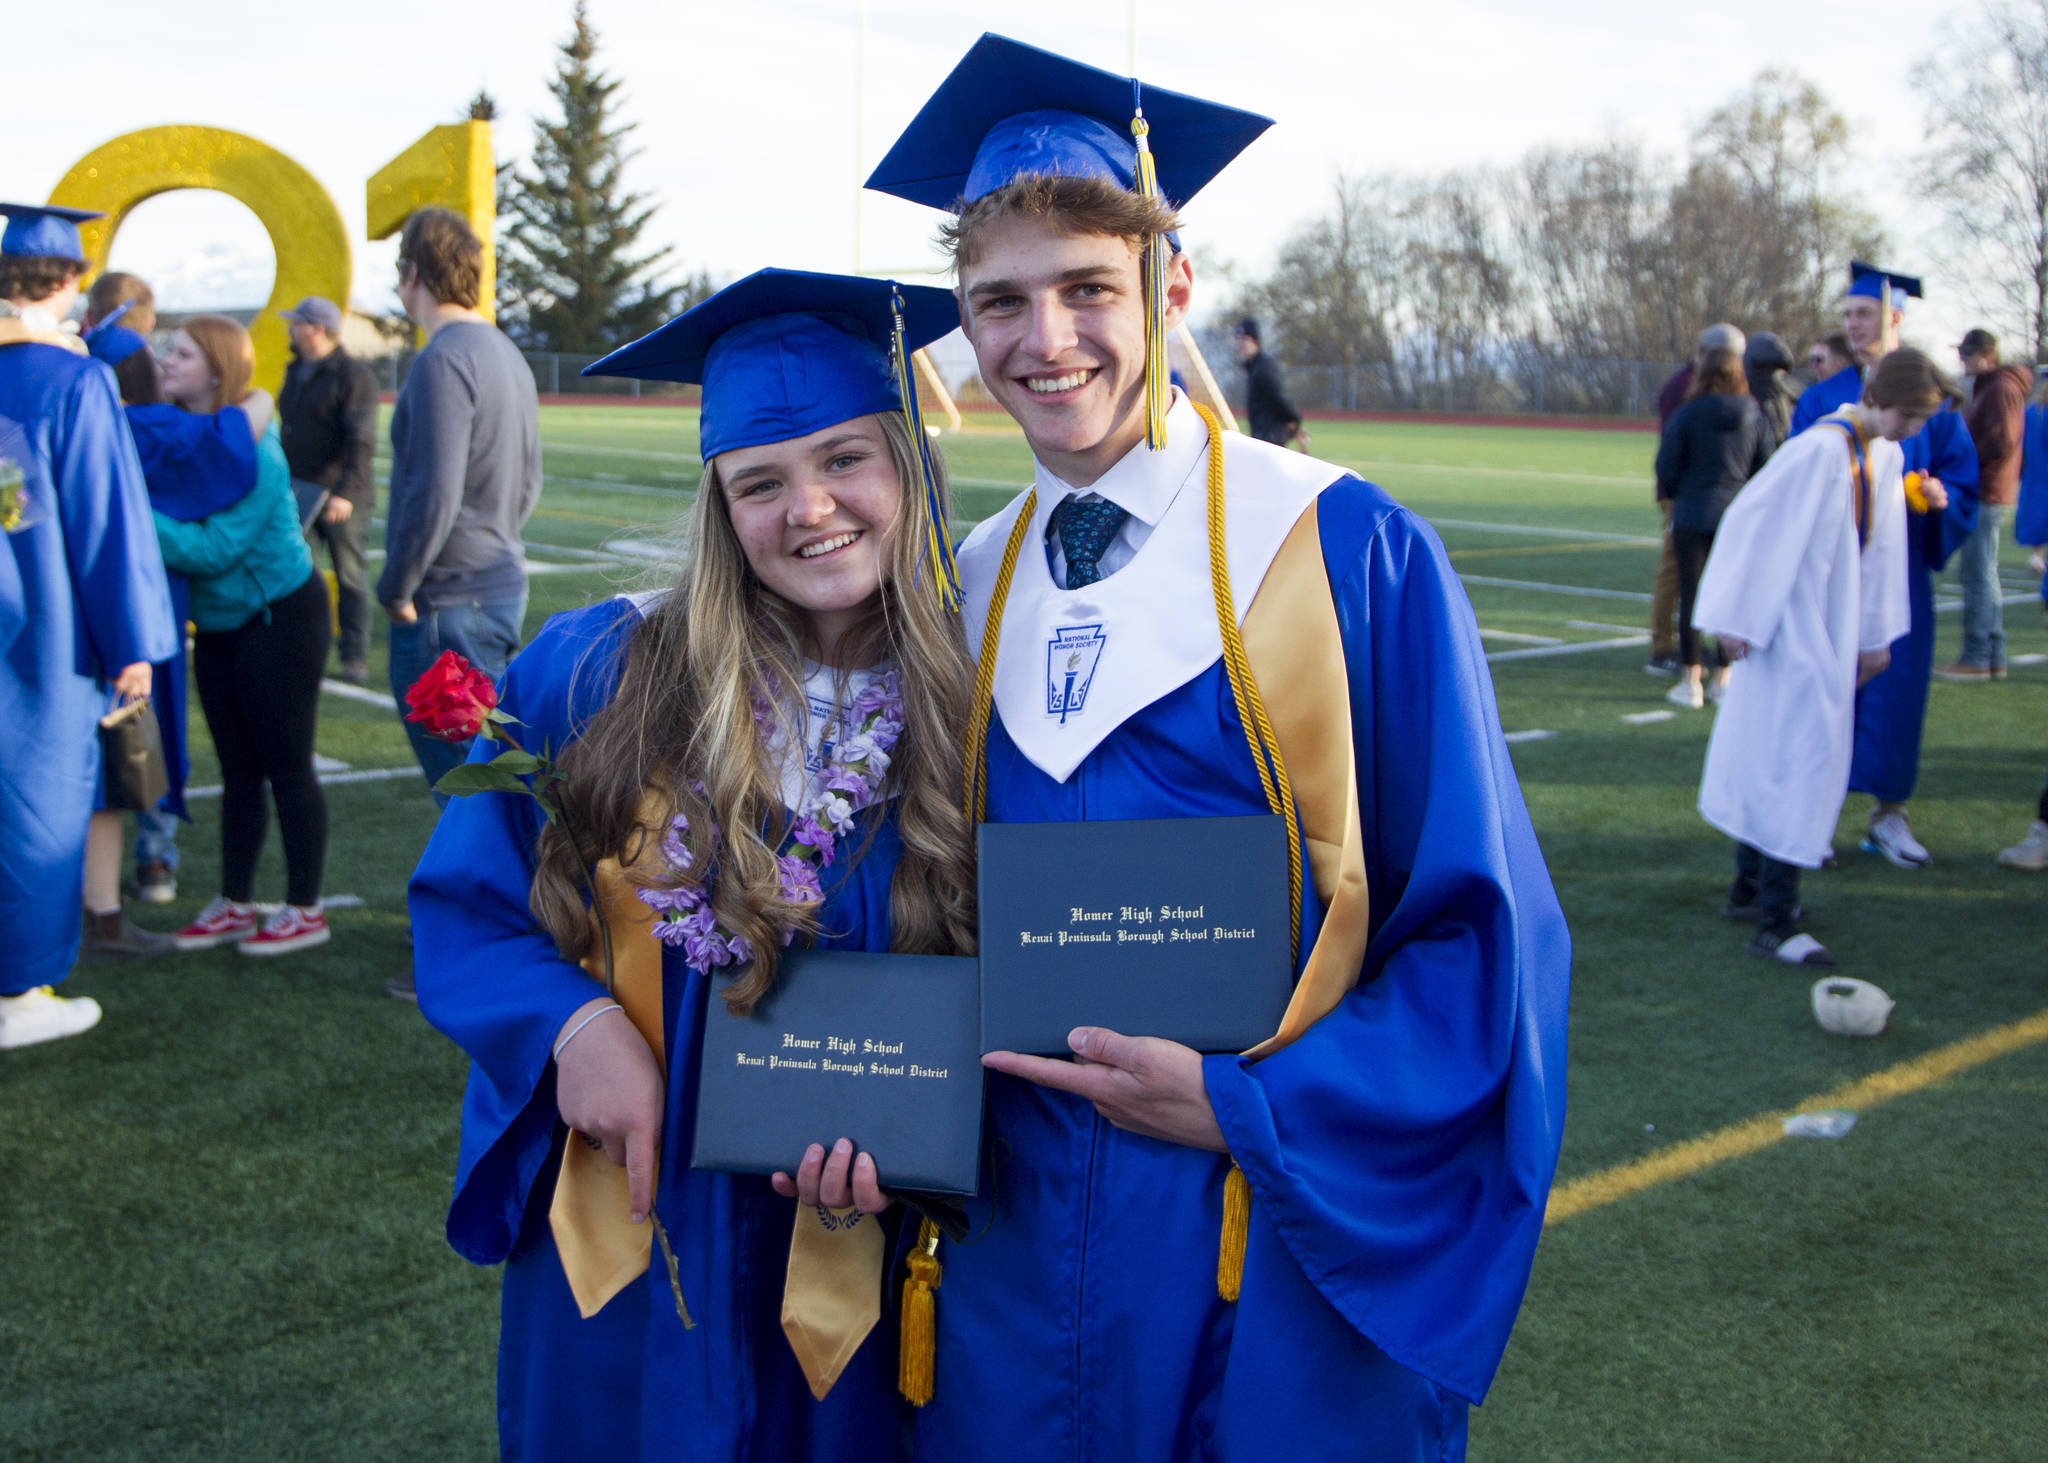 Austin and Aiyana Cline graduated from Homer High School on May 18. (Photo by Sarah Knapp/Homer News)